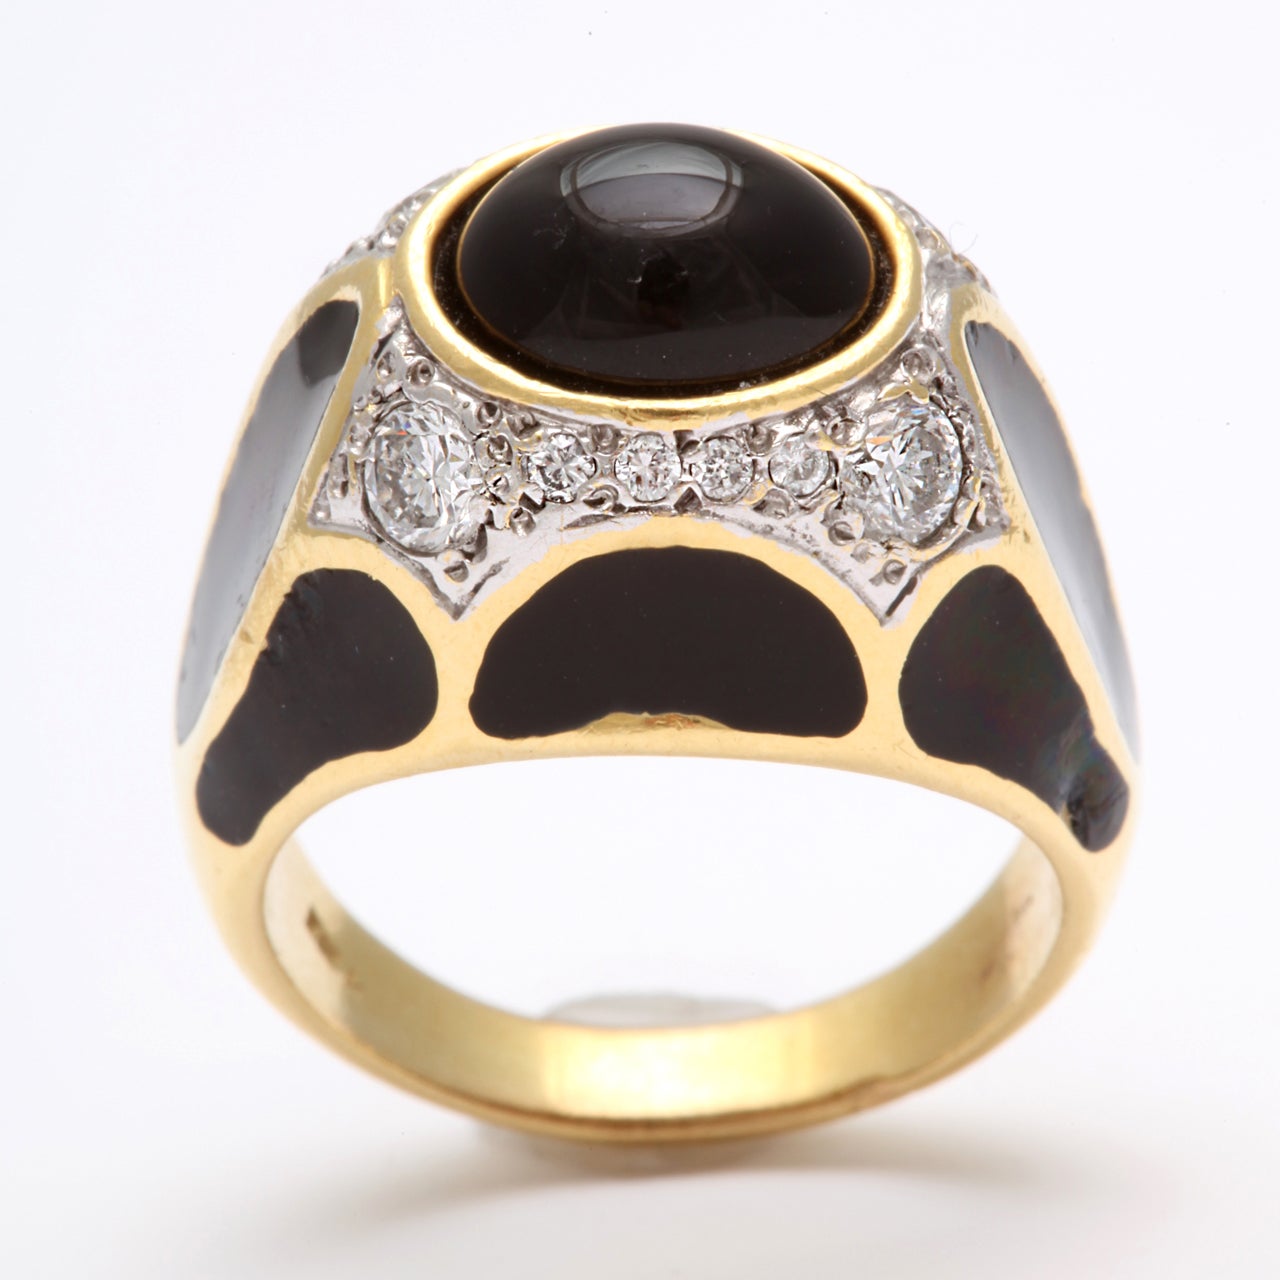 Highly stylized Black enamel Ring set with  a central Cabochon Onynx & set around with Full cut clean & white Diamonds in Platinum. Shoulders enameled with a series of stylized Black Enamel Panels. 18kt Yellow Gold & Platinum. Size 7 1/2.